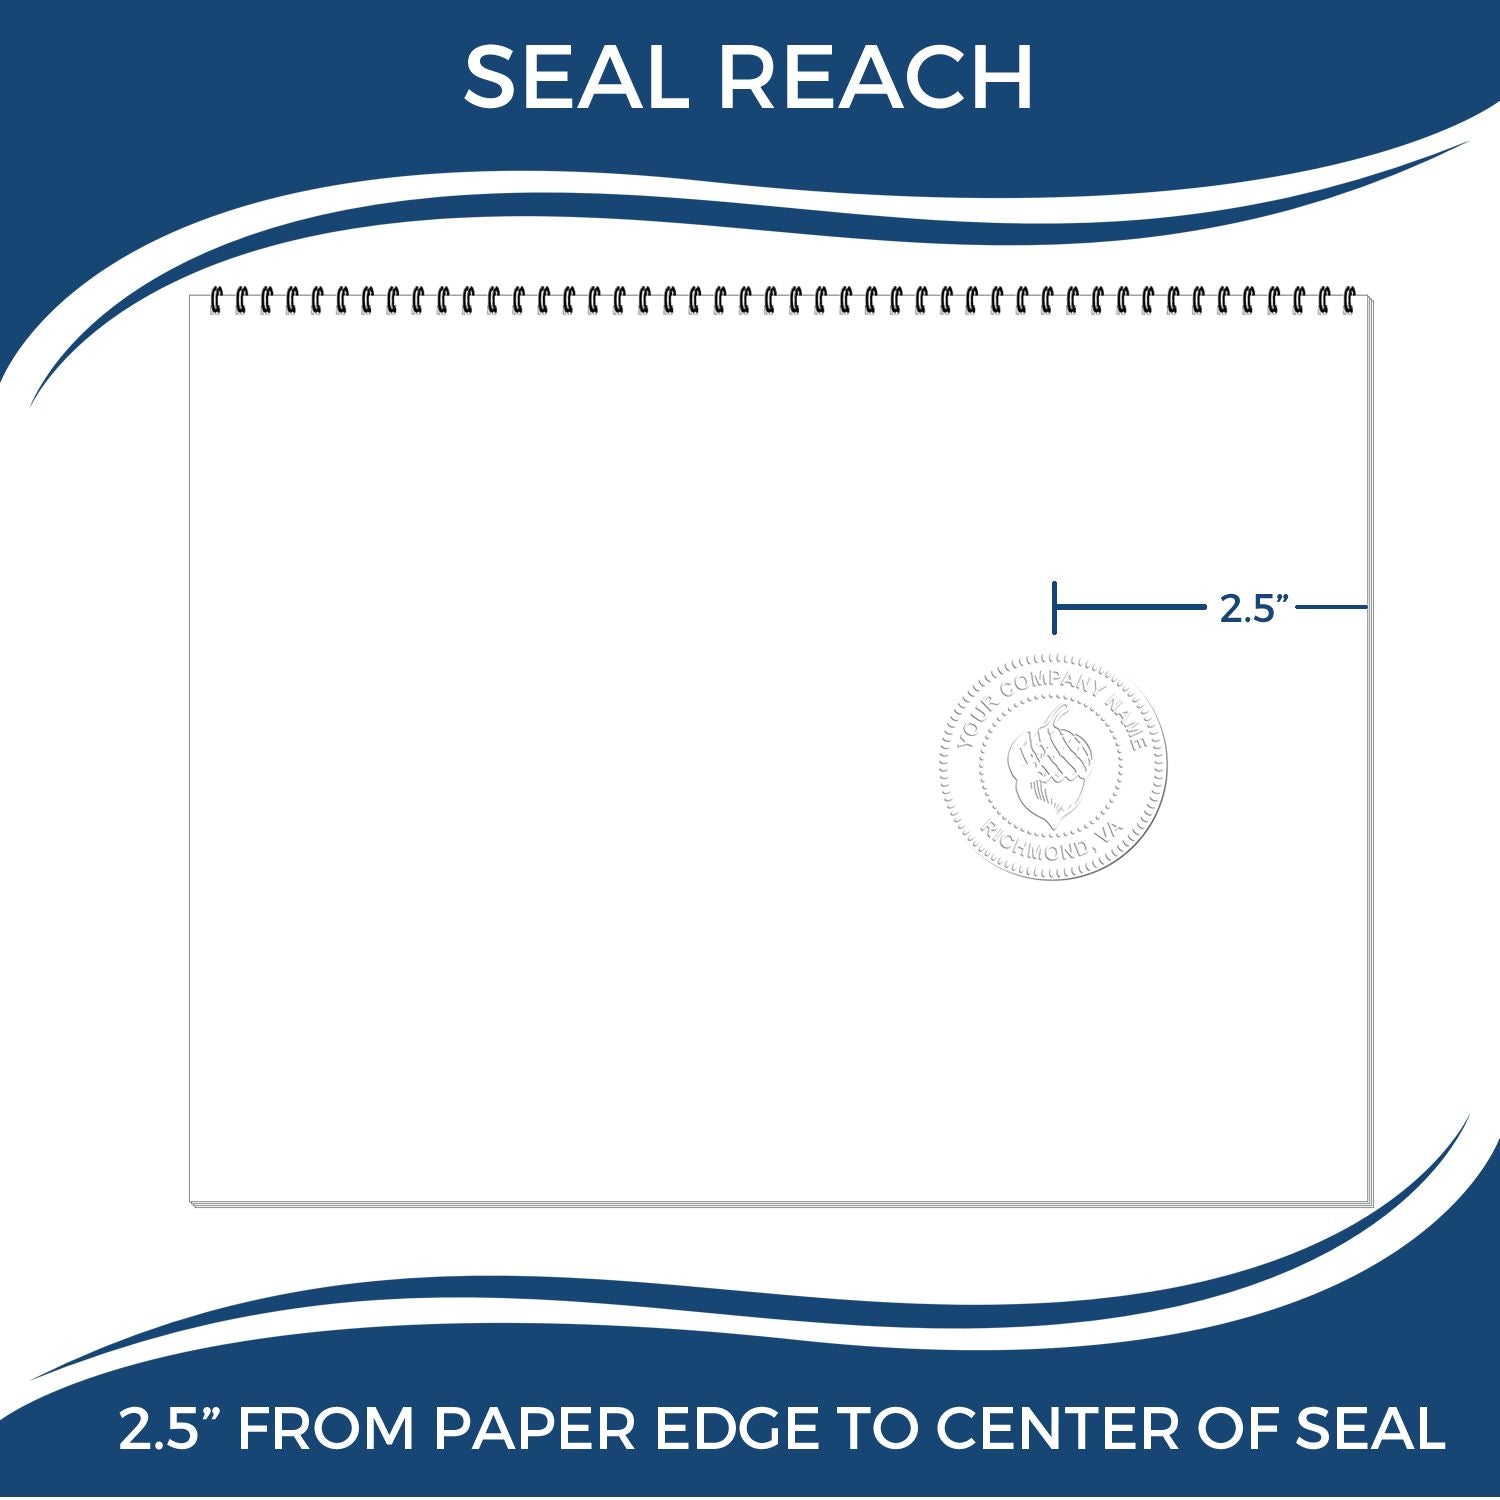 An infographic showing the seal reach which is represented by a ruler and a miniature seal image of the Heavy Duty Cast Iron District of Columbia Engineer Seal Embosser